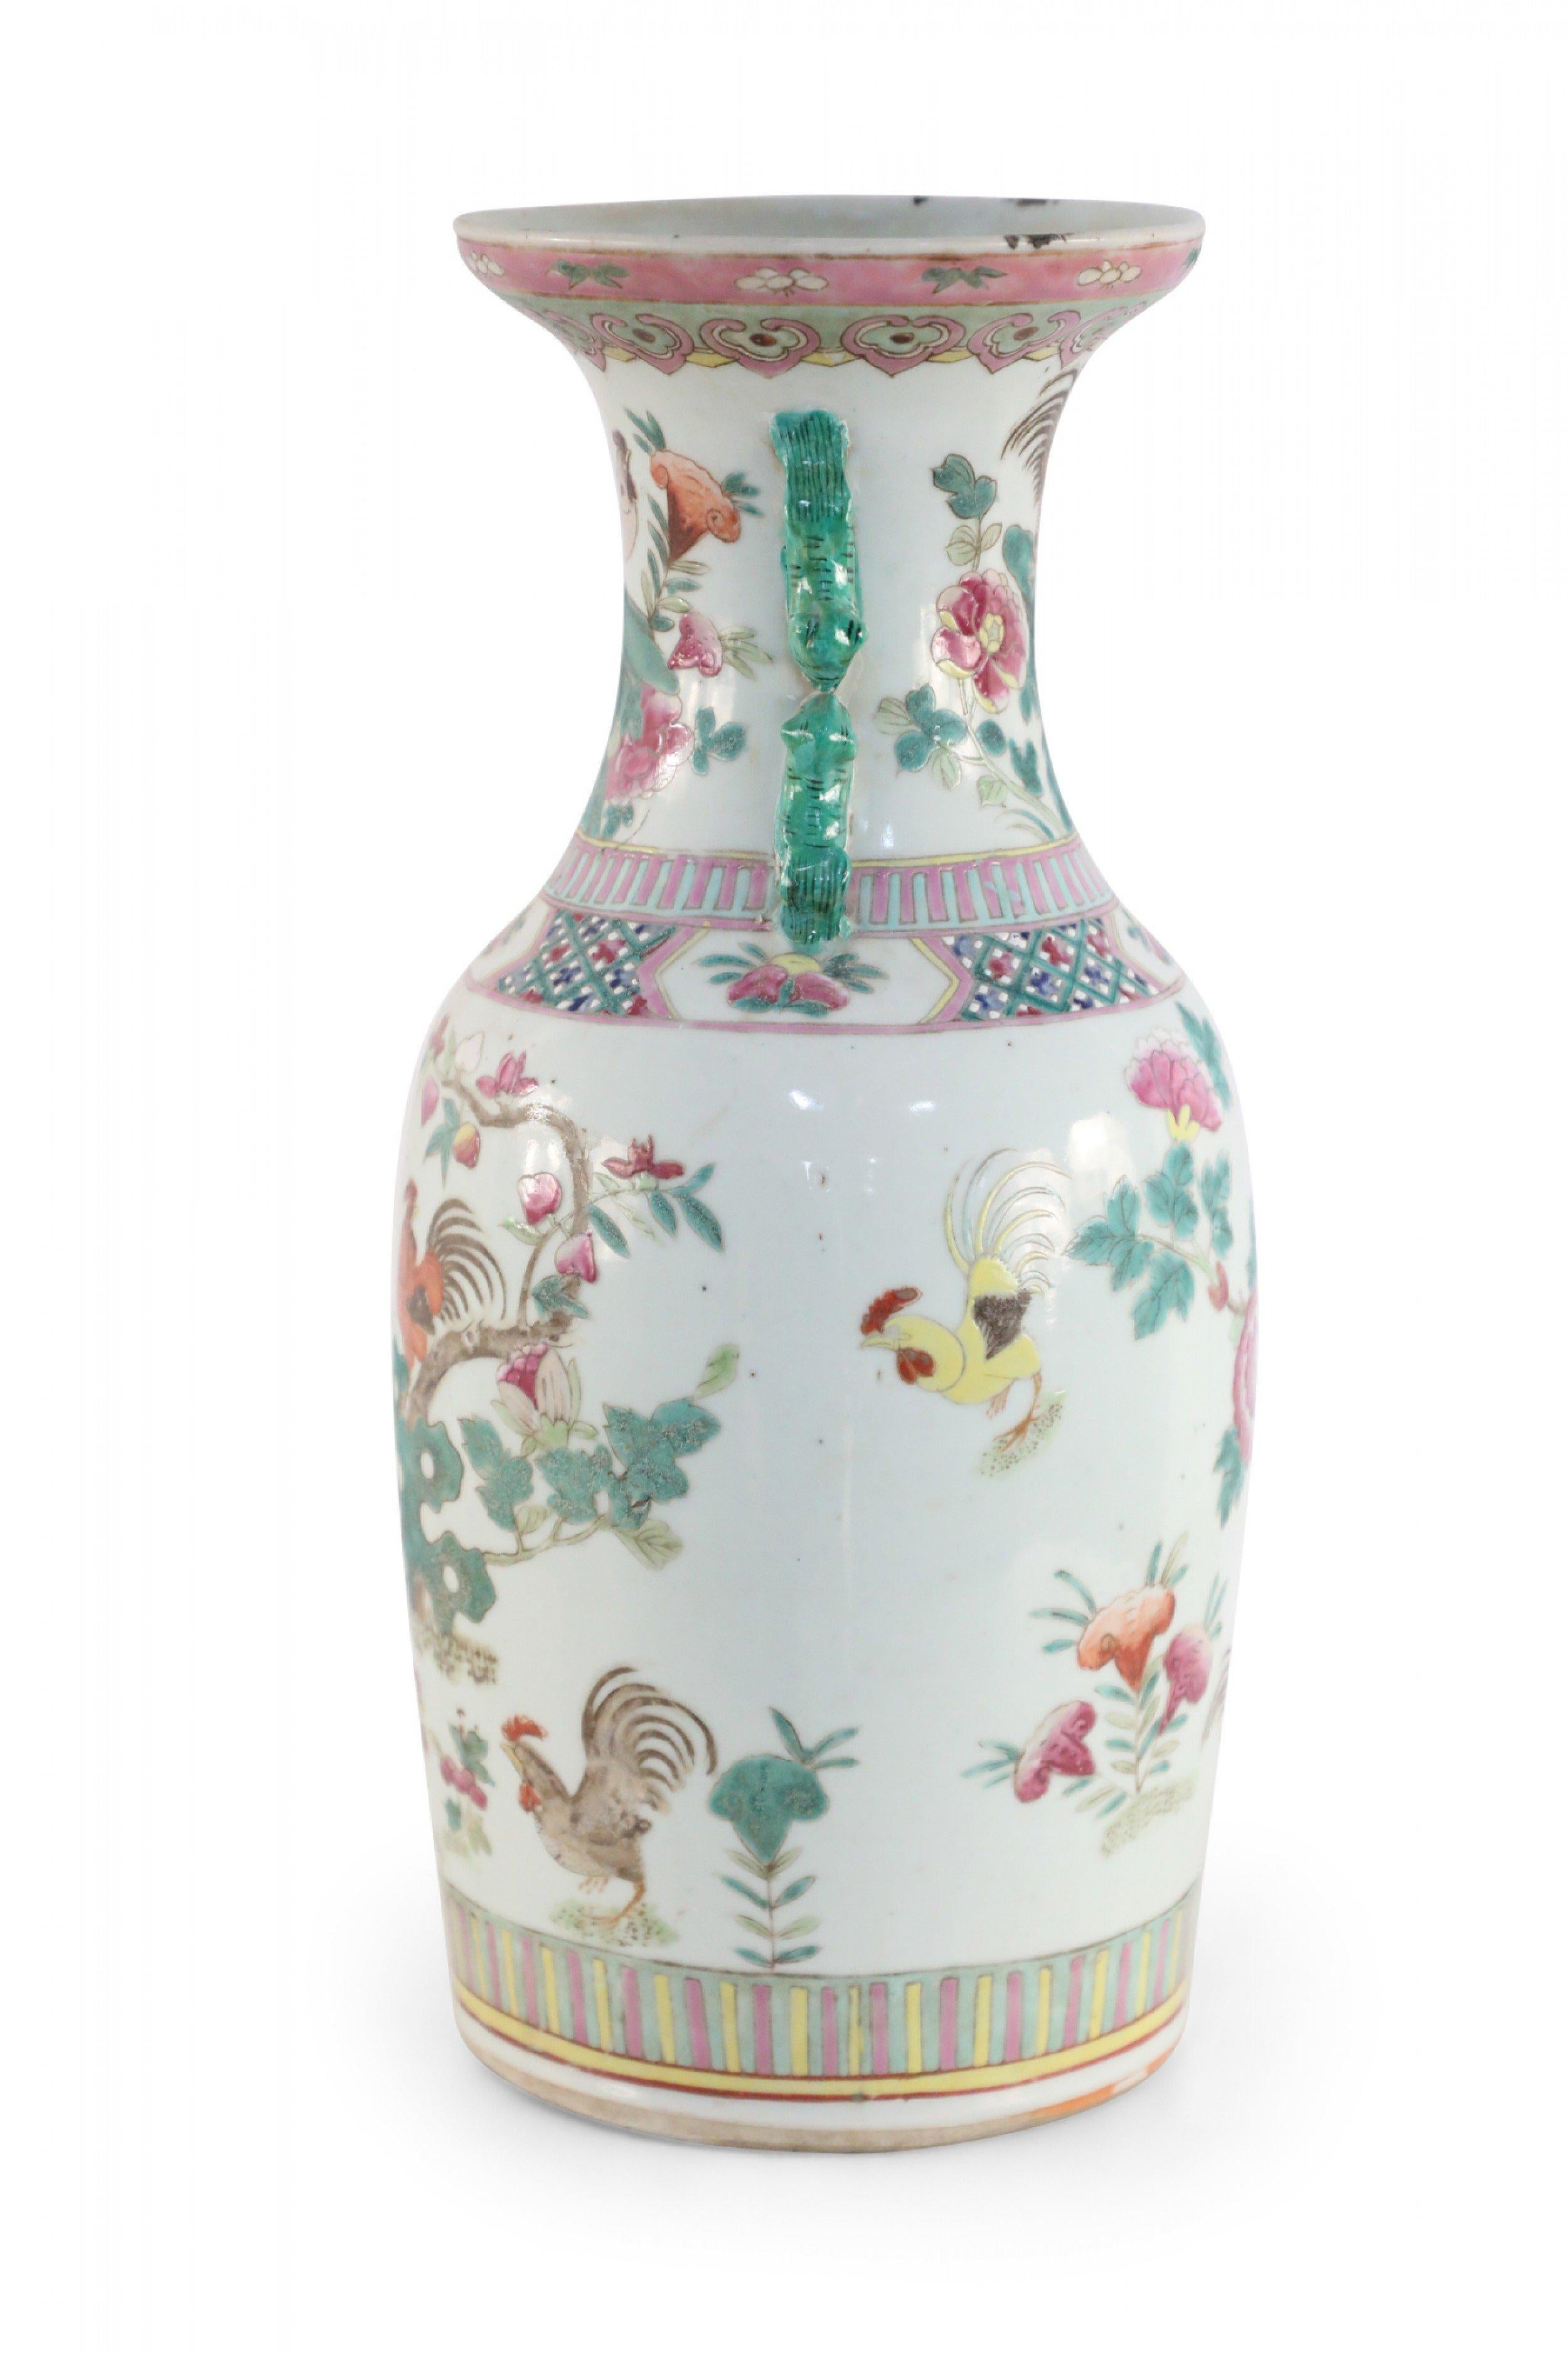 Antique Chinese (early 20th century) white porcelain urn incised and painted with decorations of roosters amid blooming floral branches mixed with geometric patterned bands at the bottom, middle and top accented with two green, scrolled lion handles